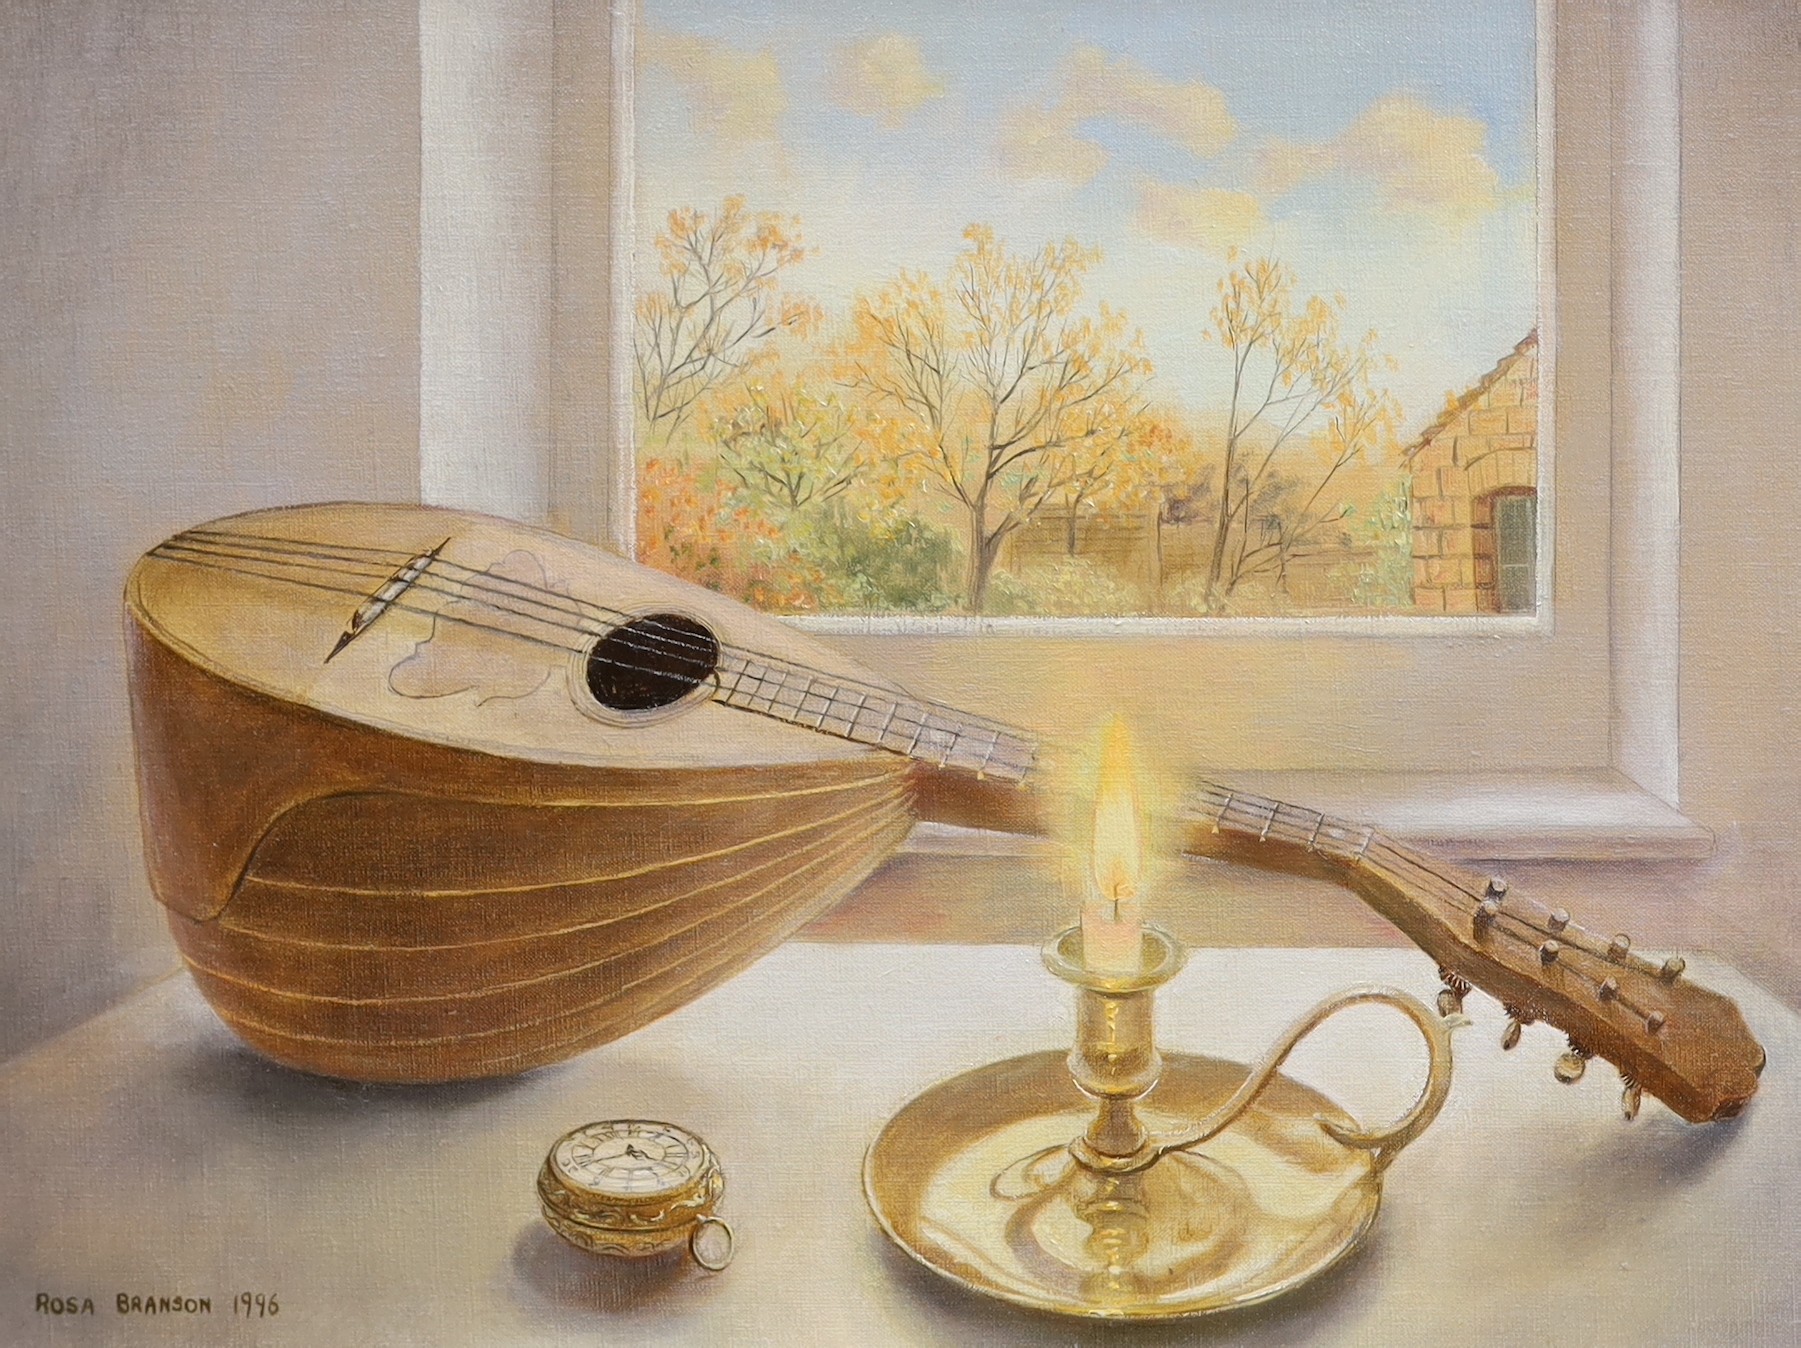 Rosa Branson (b.1933), oil on canvas, Still life of a mandolin, chamberstick and pocket watch, signed and dated 1996, 30 x 40cm